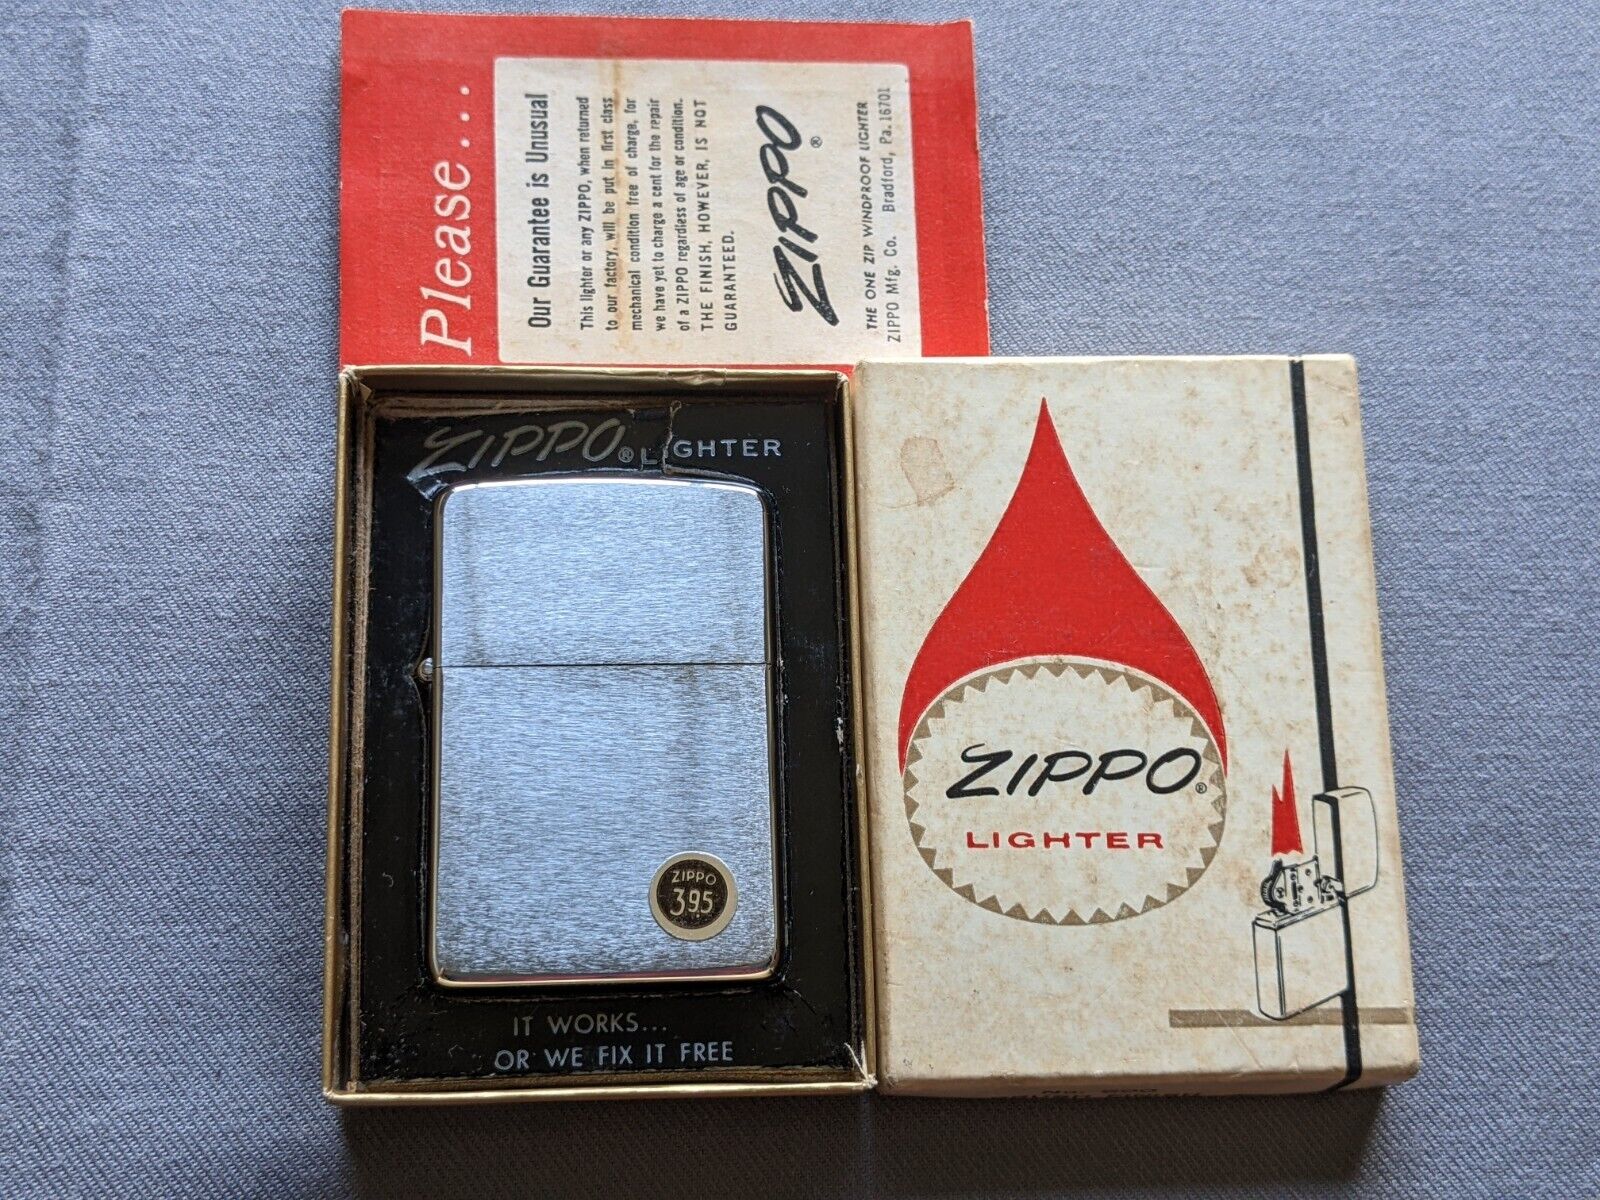 VTG 1969 BRUSHED CHROME ZIPPO LIGHTER SOLID FUEL CELL & PRICE STICKER MIB RARE